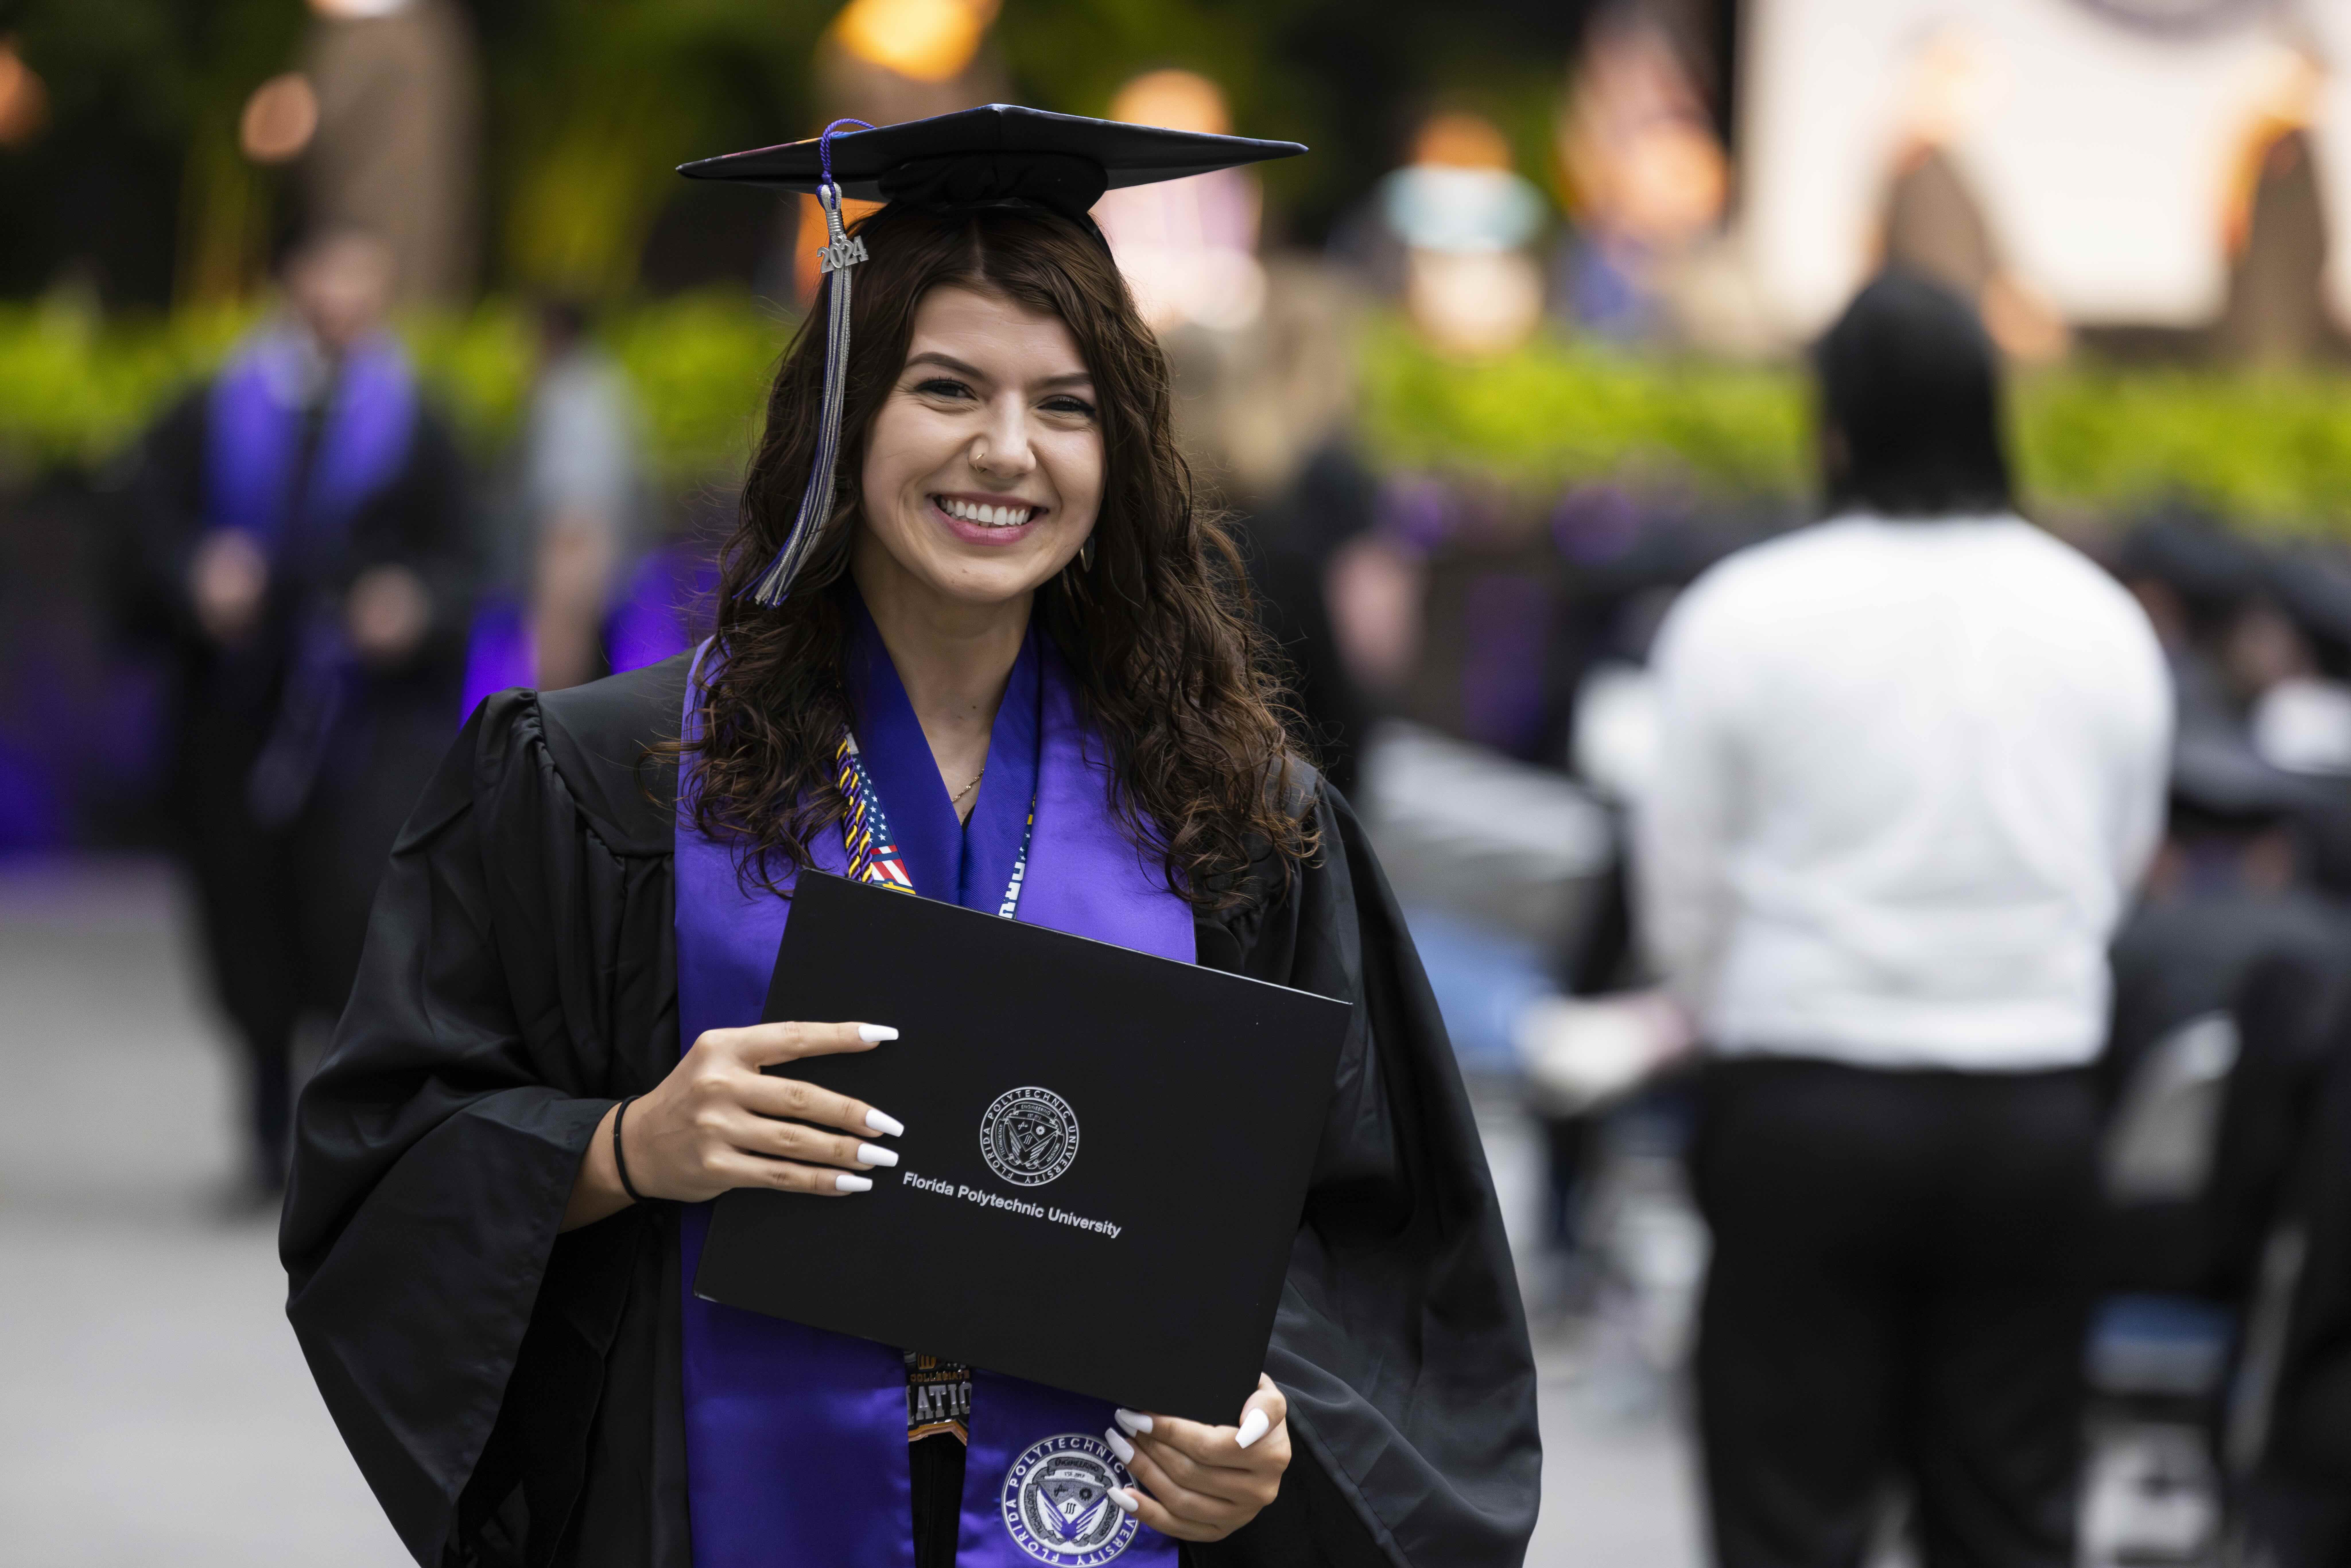 Florida Poly celebrates in-demand STEM grads, departing president at 2024 commencement